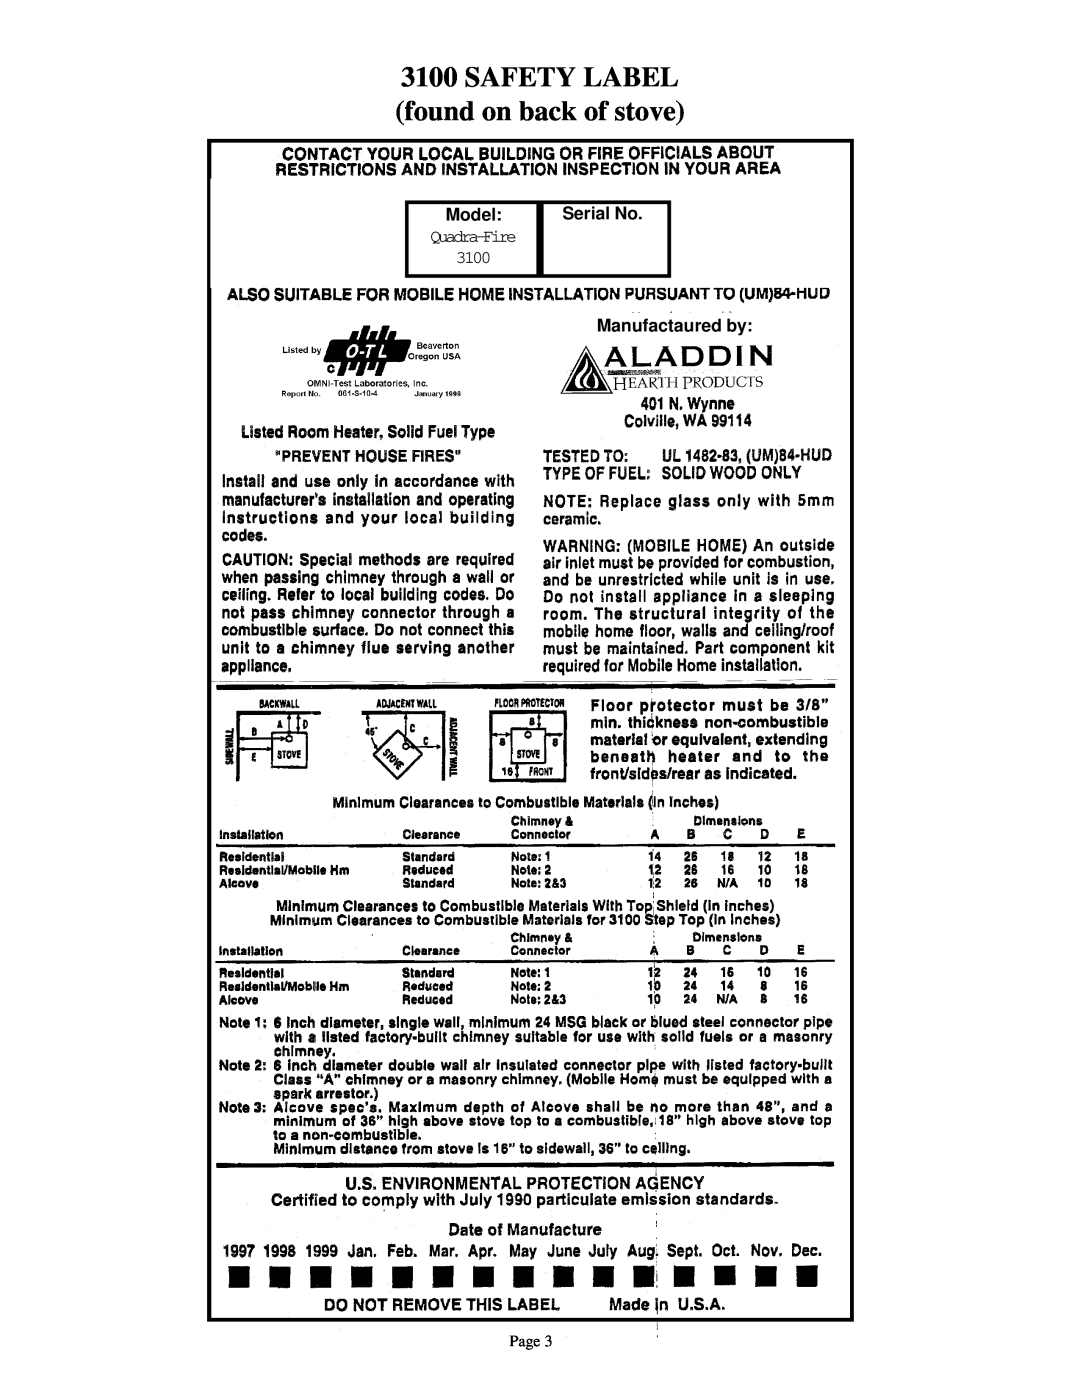 Quadra-Fire 3100 owner manual SAFETY LABEL found on back of stove, Model, Quadra-Fire, Serial No, Manufactaured by 